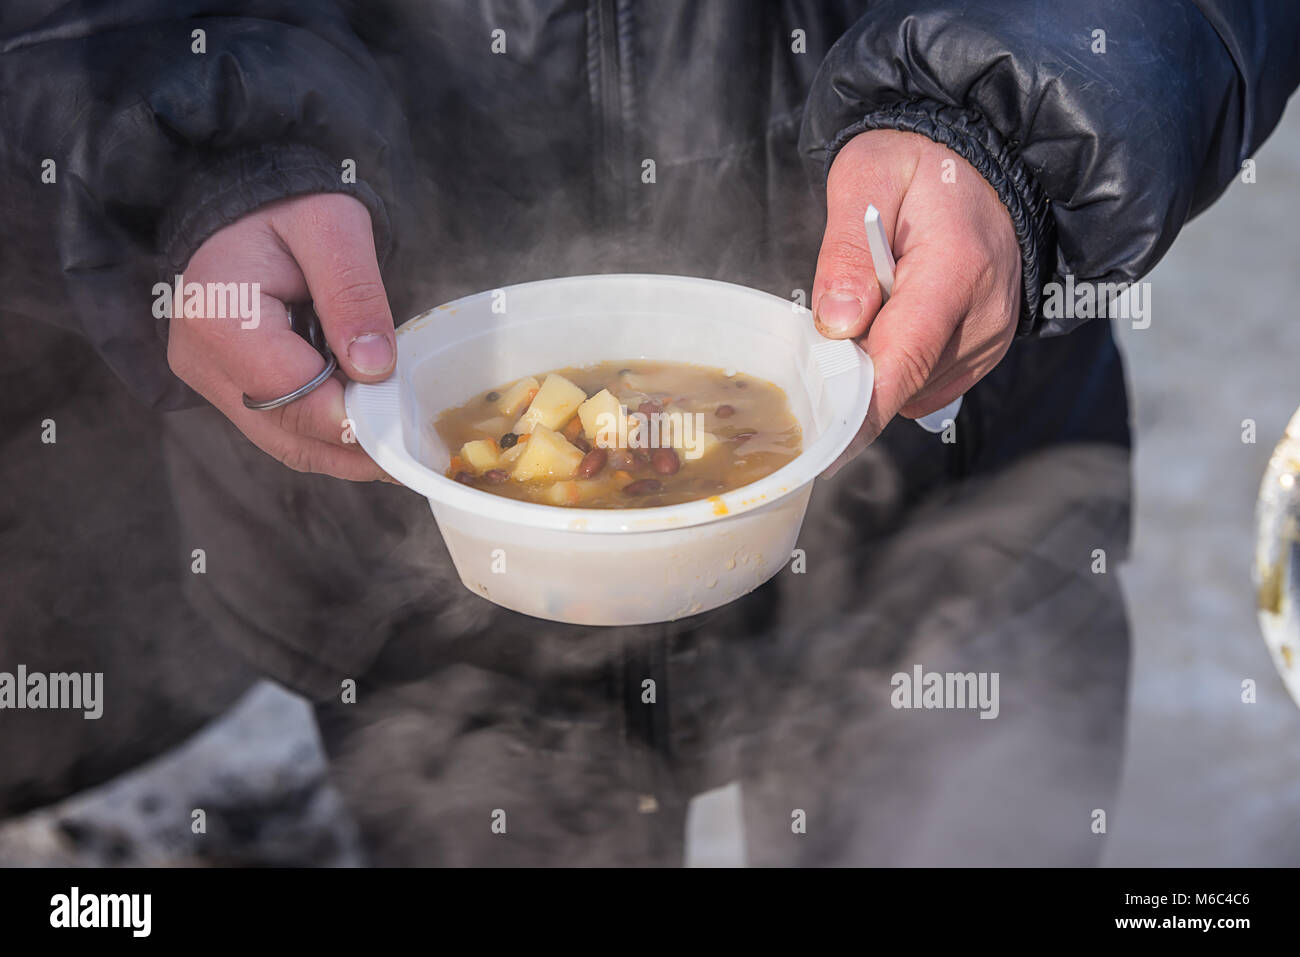 feeding homeless people on the street, social problems, hungry people eat Stock Photo